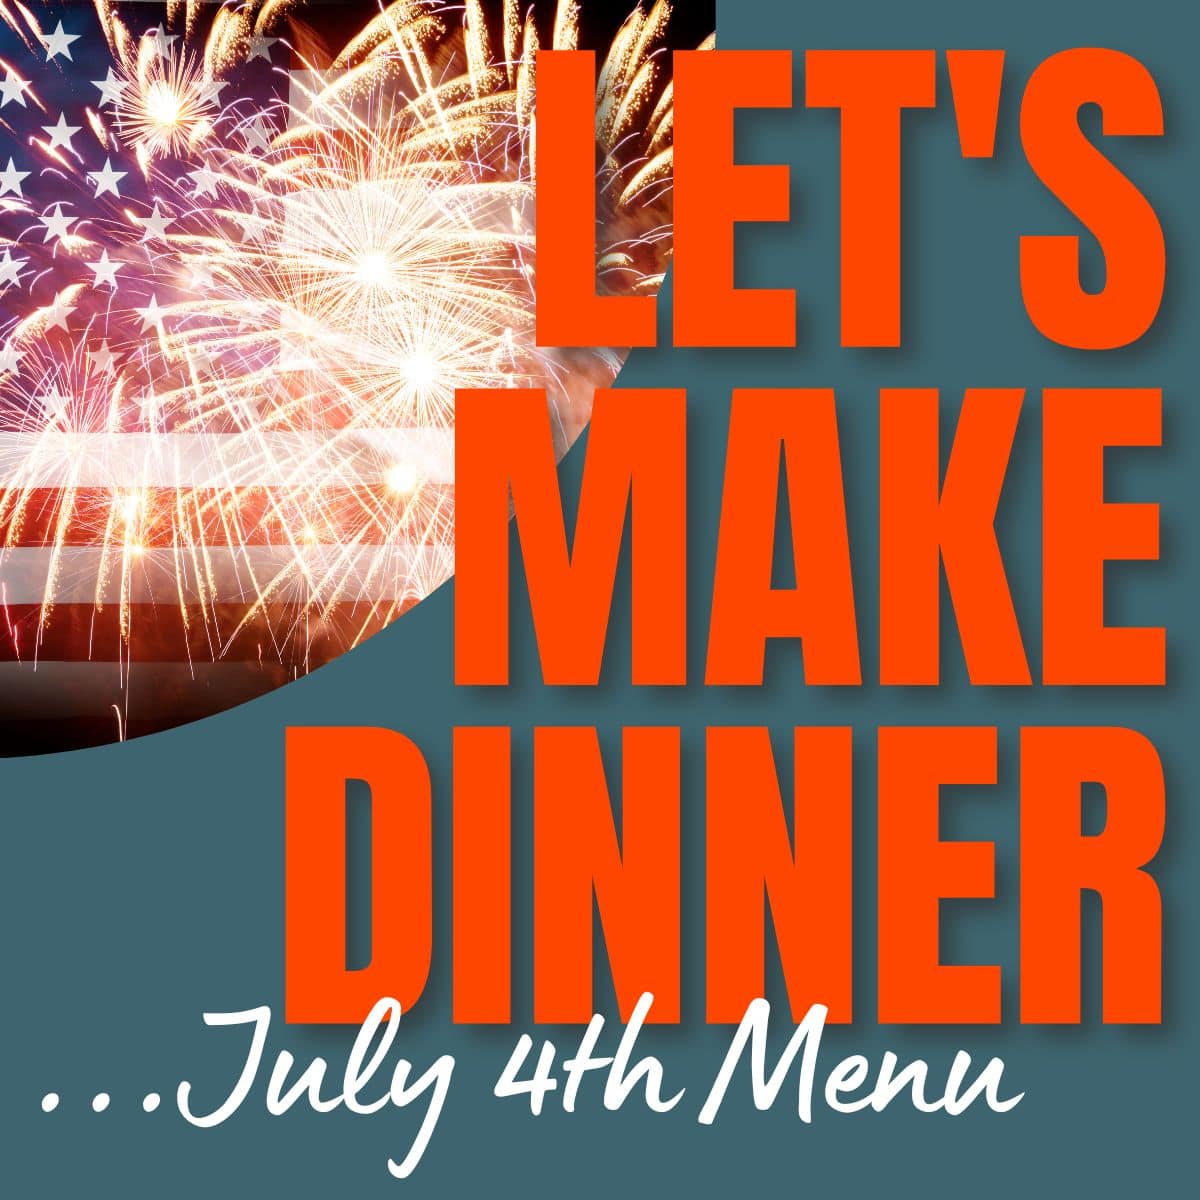 Let's Make Dinner text plus a photo of a flag and fireworks